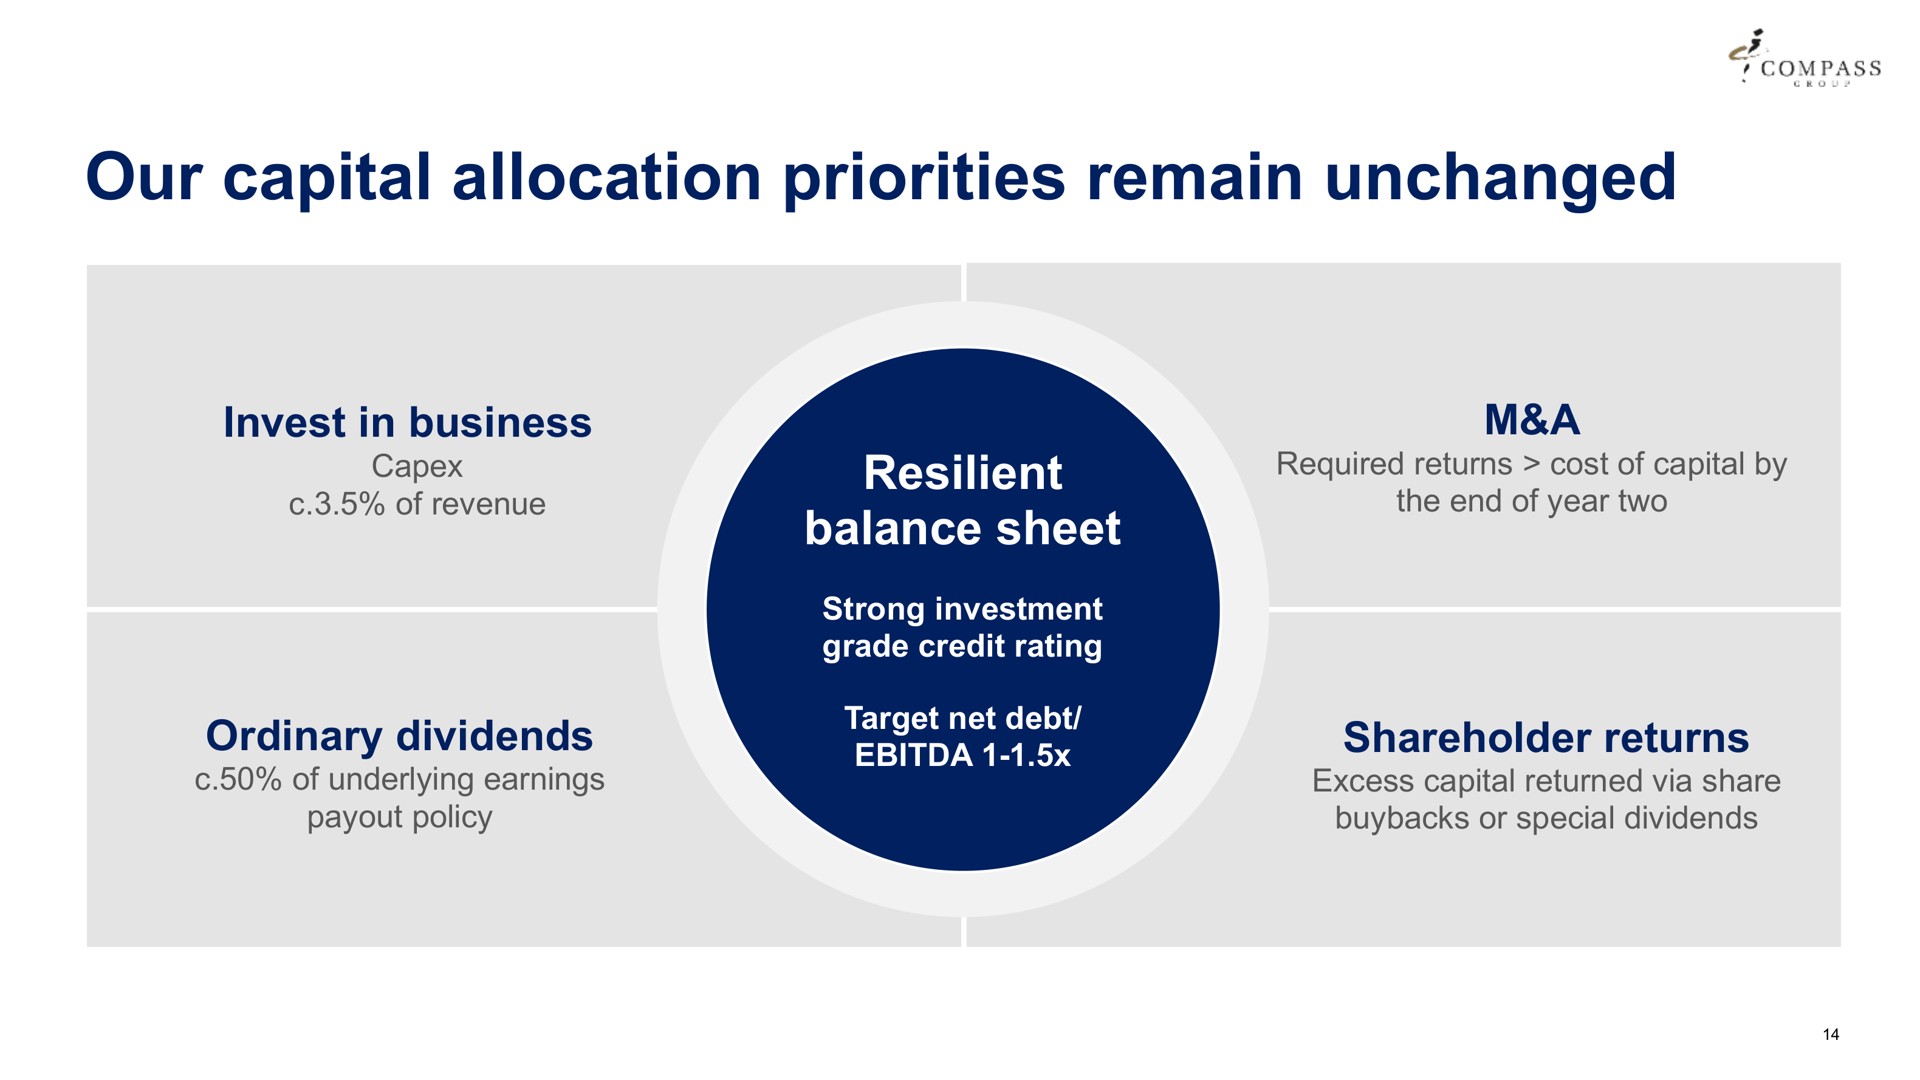 our capital allocation priorities remain unchanged invest in business of revenue ordinary dividends of underlying earnings policy resilient balance sheet strong investment grade credit rating target net debt a required returns cost of by the end of year two shareholder returns excess returned via share or special dividends | Compass Group